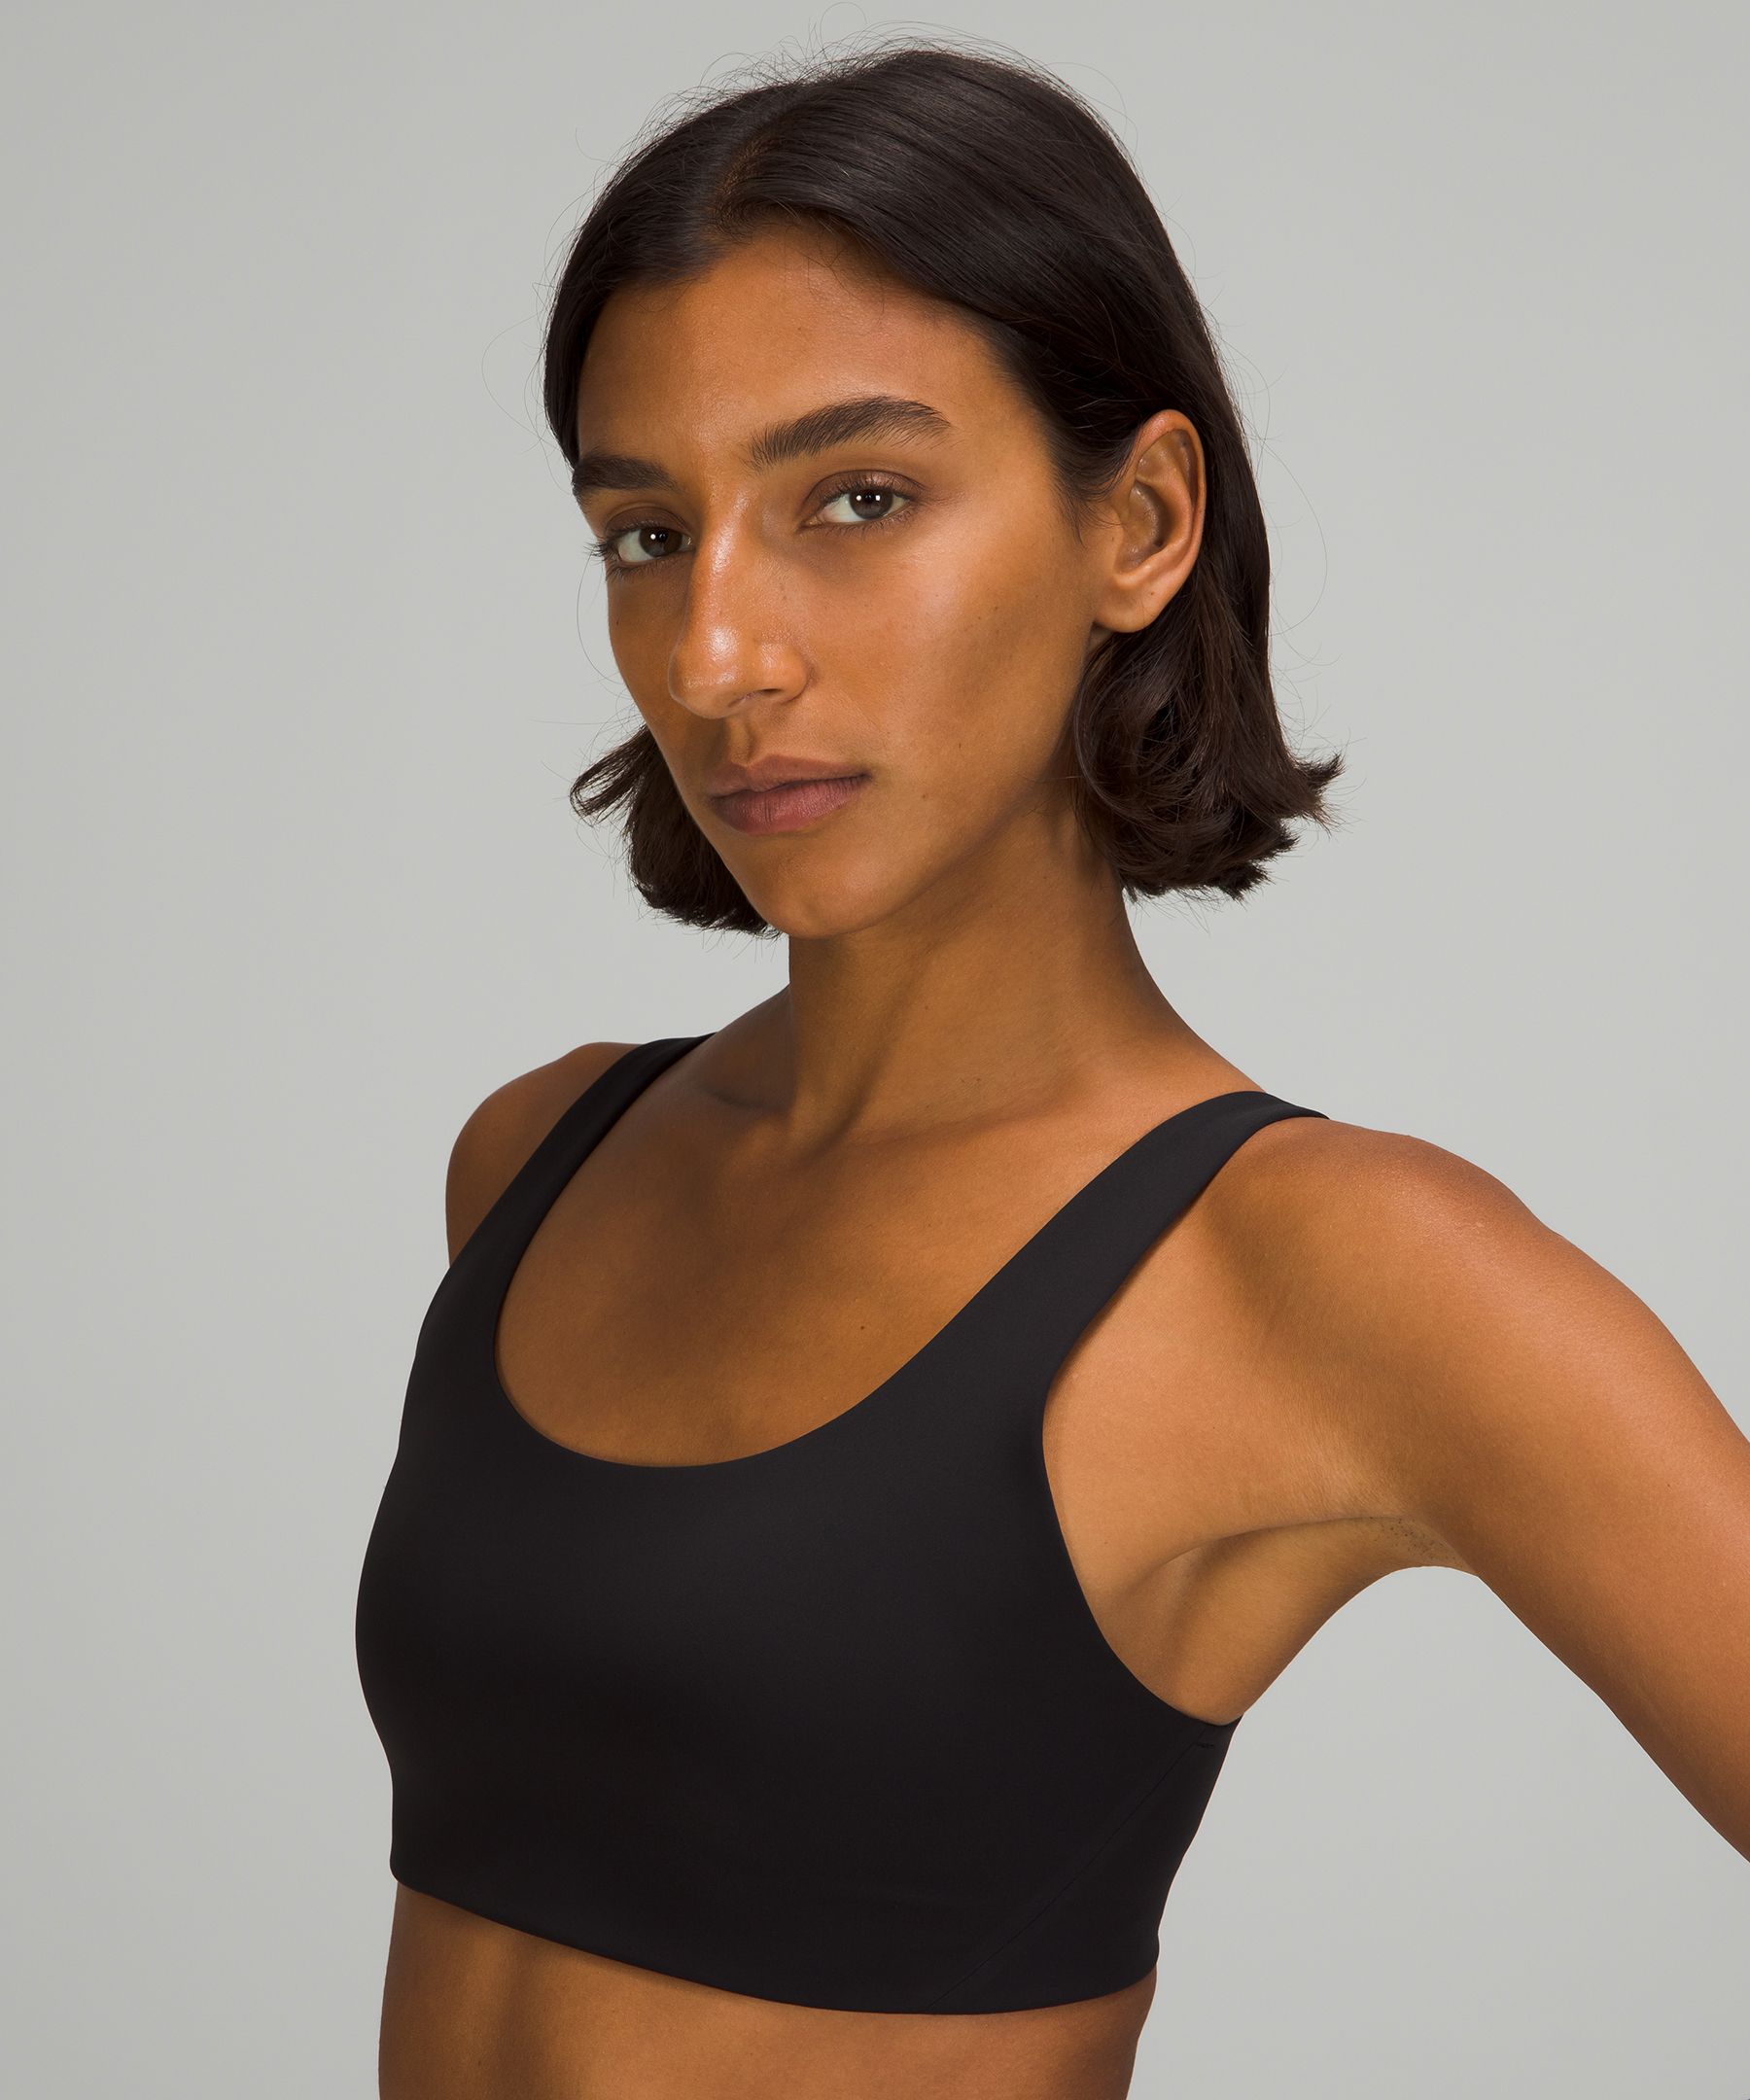 Lululemon In Alignment Straight-strap Bra *light support, A/B cups